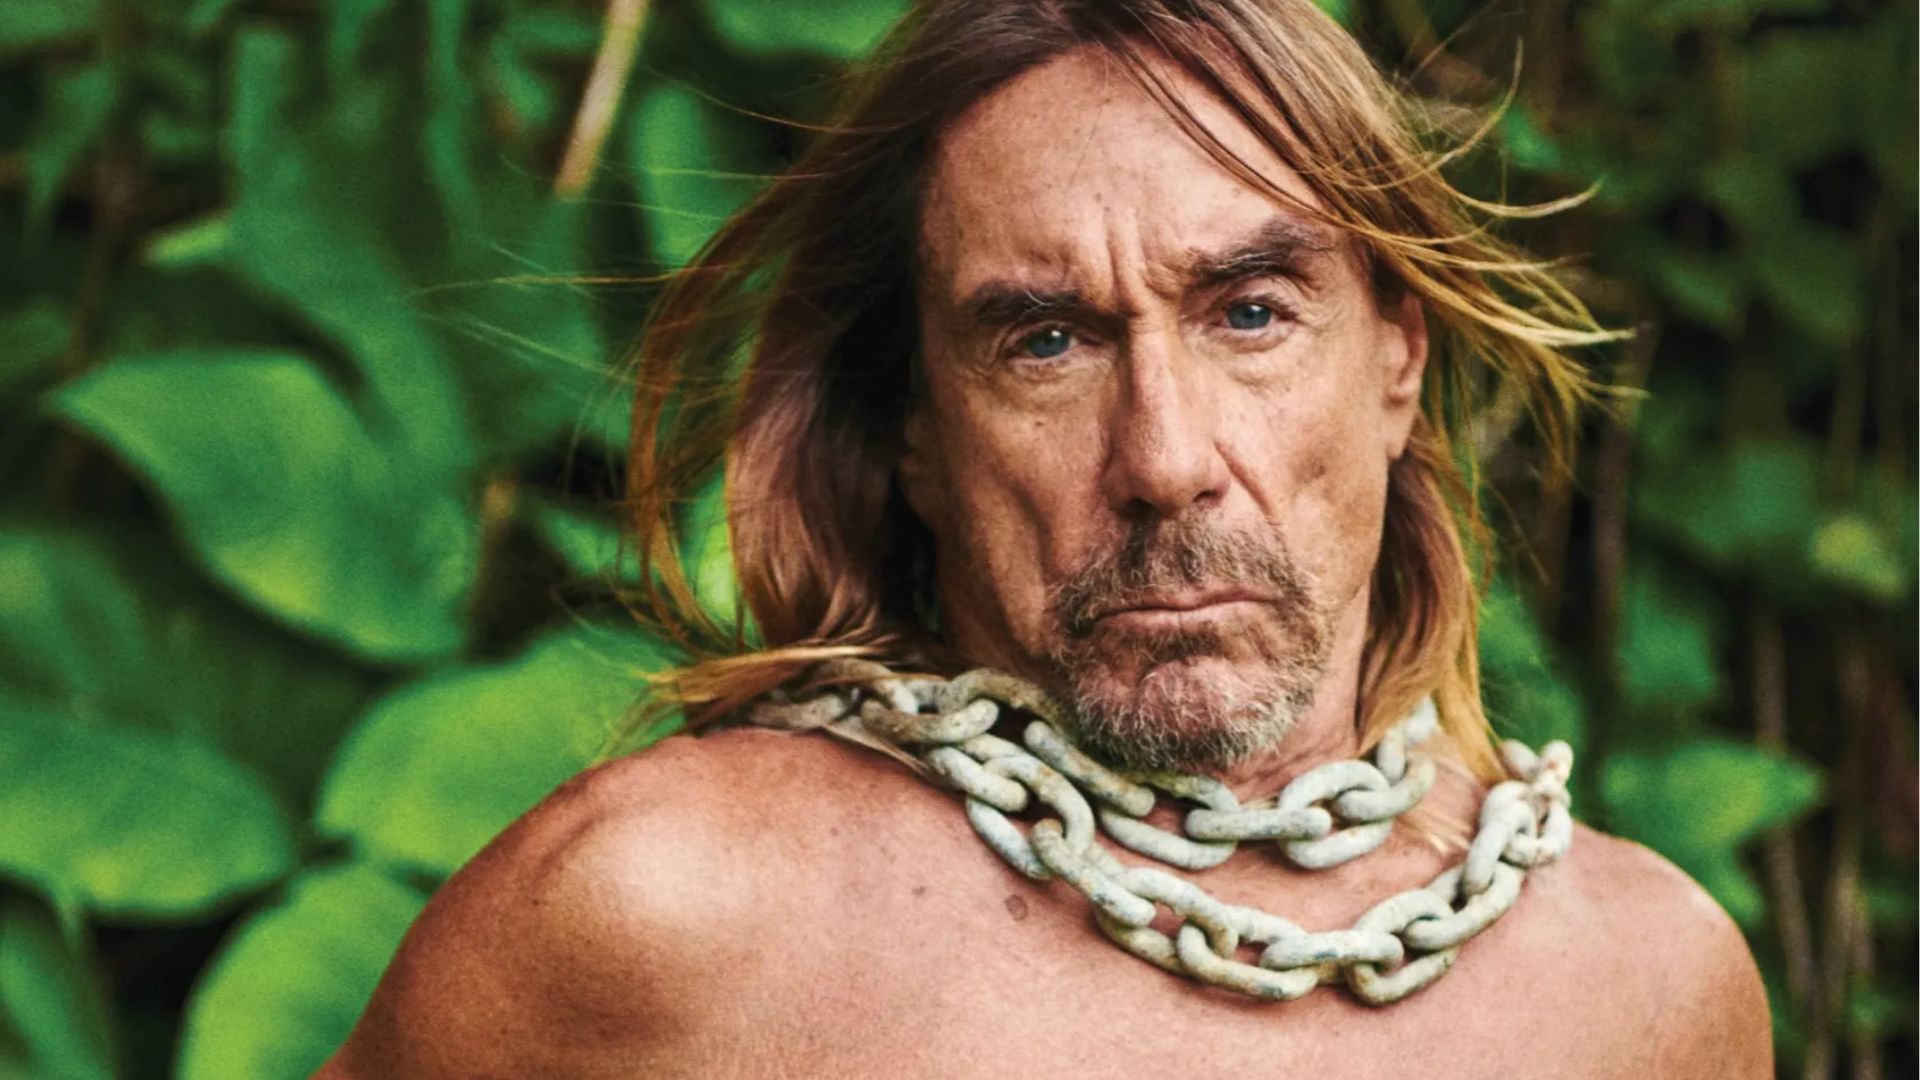 Iggy Pop With Chain In Neck